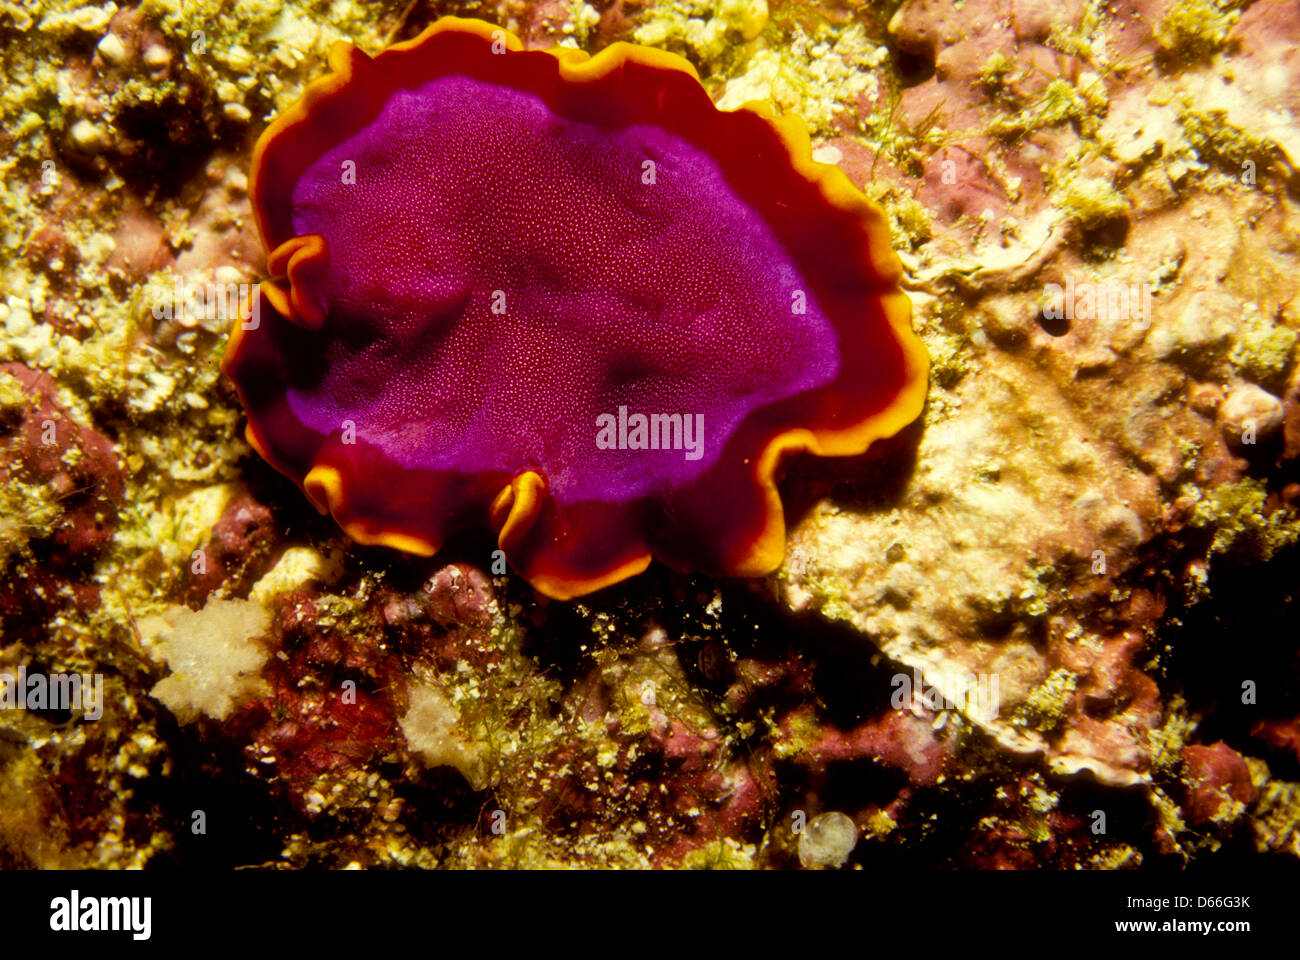 Flat Worm,,Pseudoceros sp,Sipadan Nov 1990 Underwater Slide Conversions,one of the richest marine habitats in the world,Malaysia Stock Photo